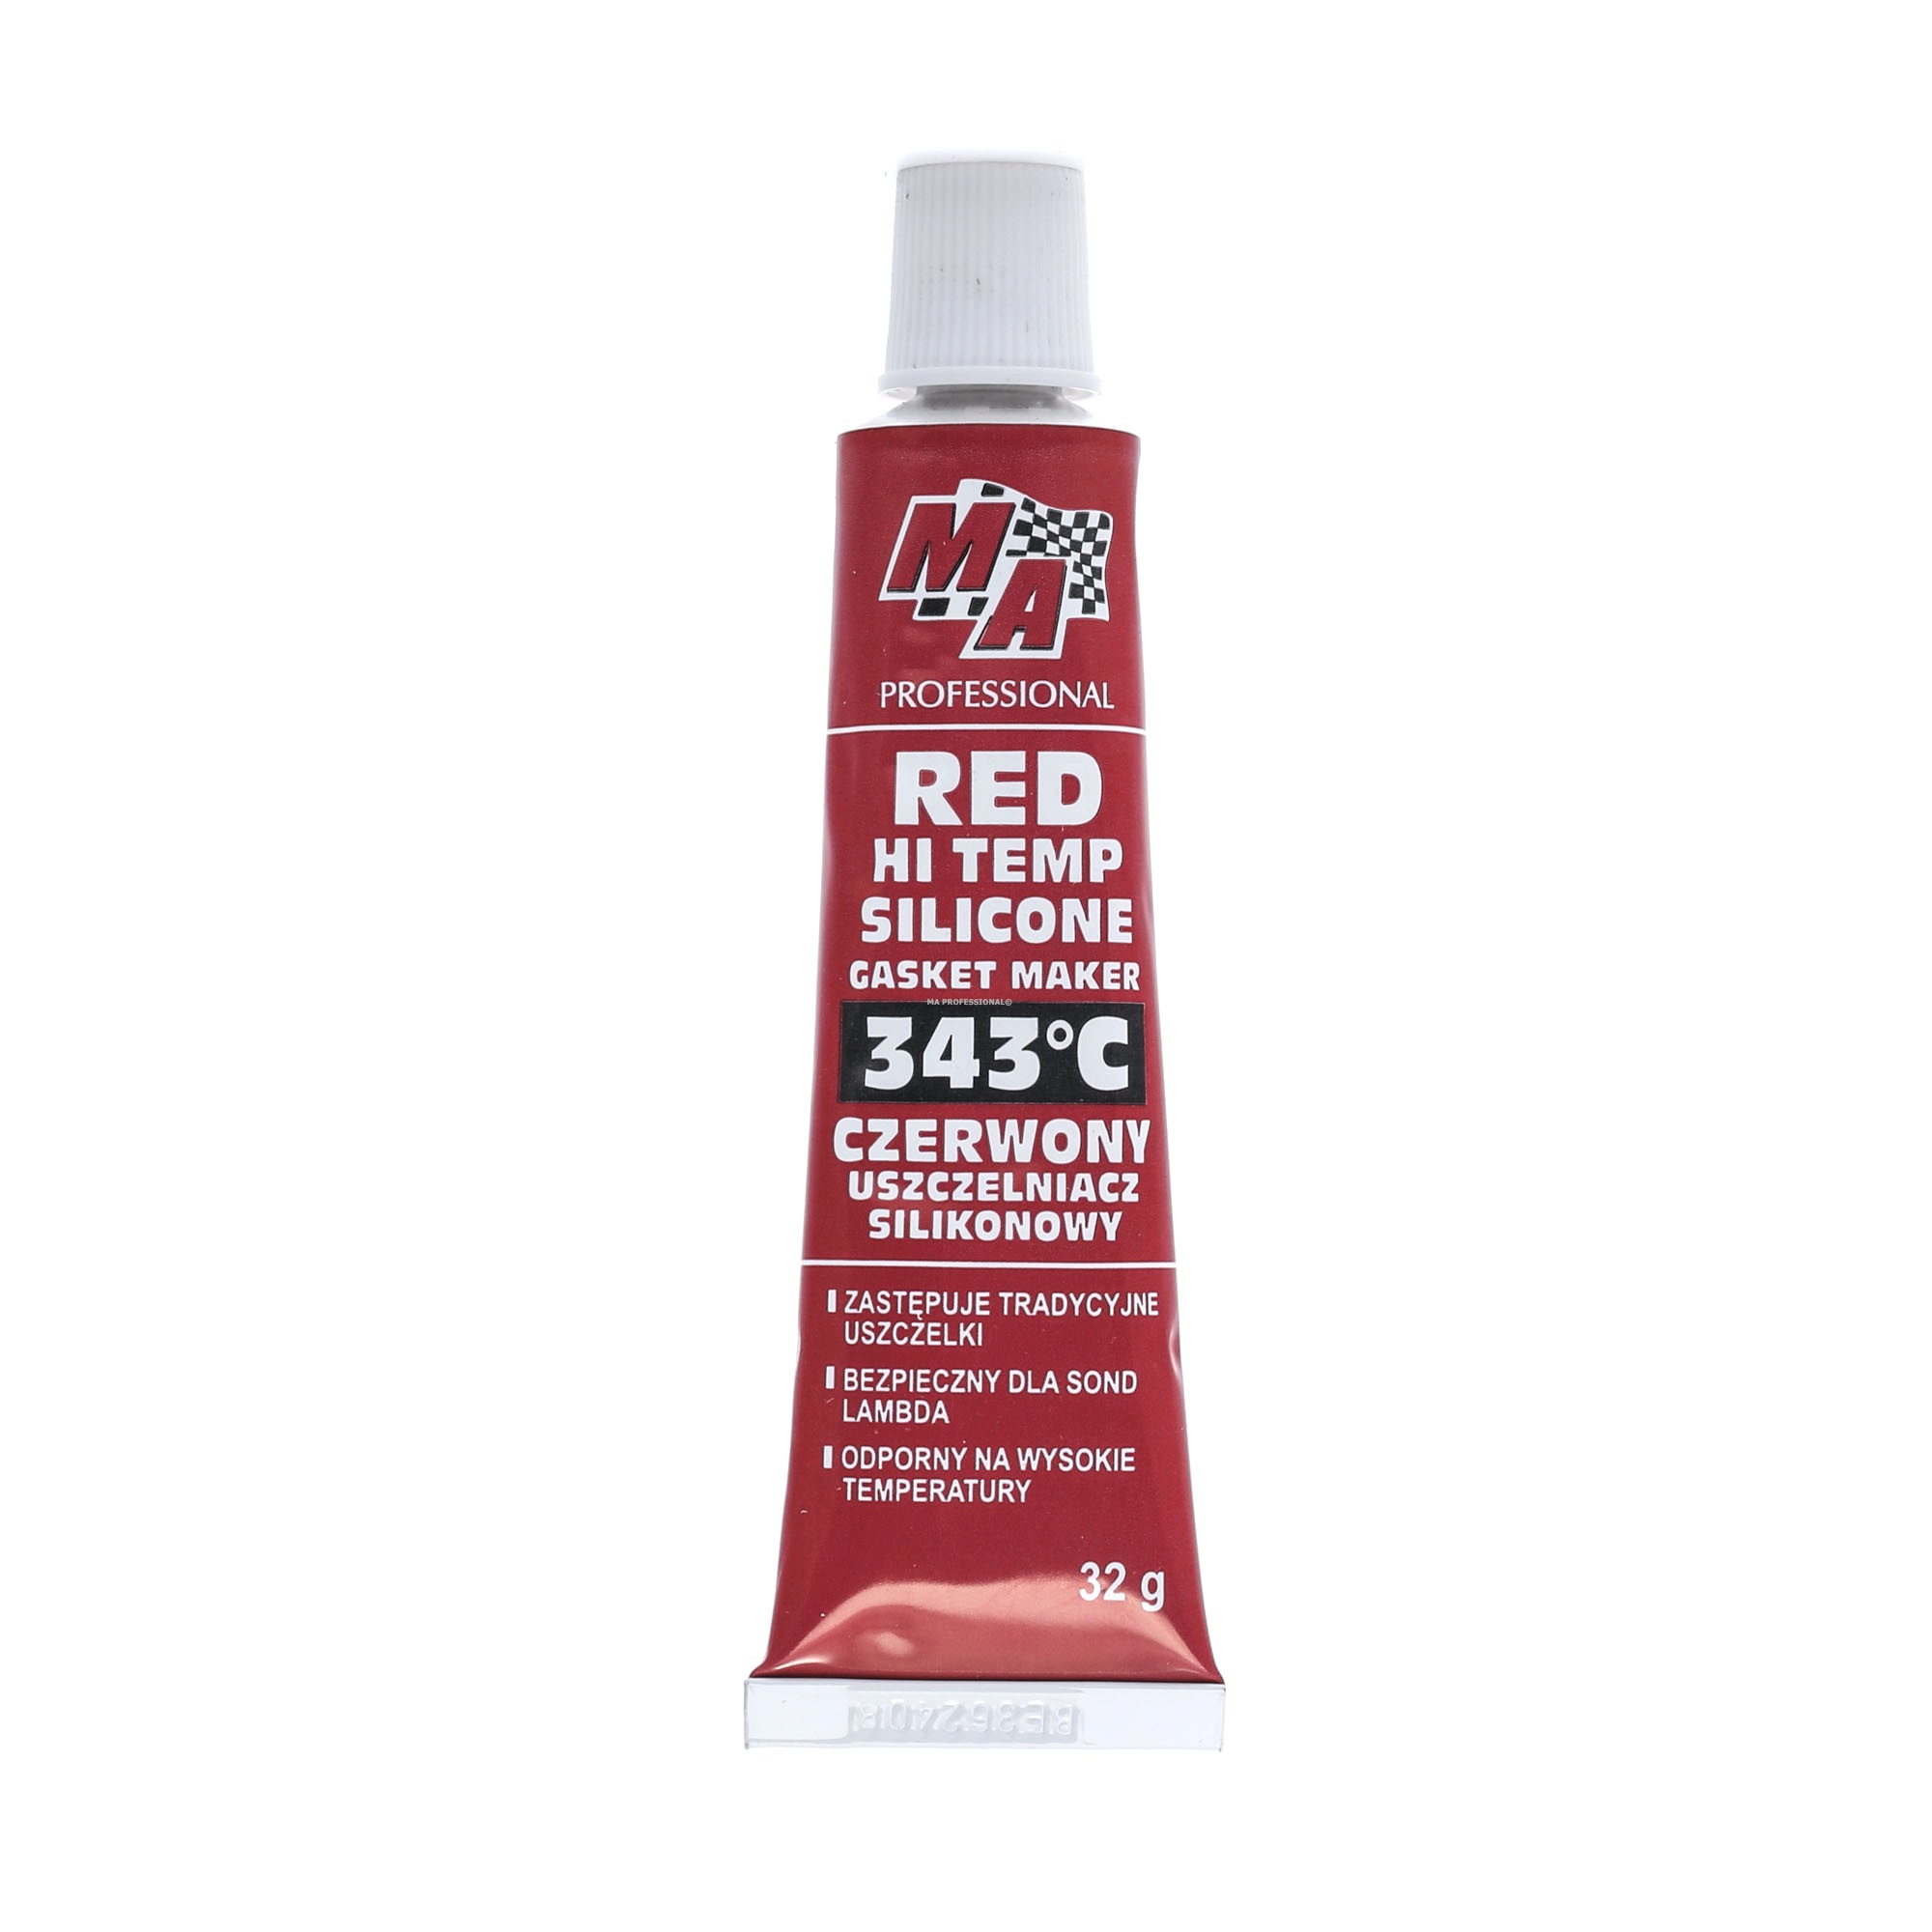 MA PROFESSIONAL 20A17 General purpose sealant Tube, Silicone, Capacity: 32ml, Permanently elastic, Oil resistant, red